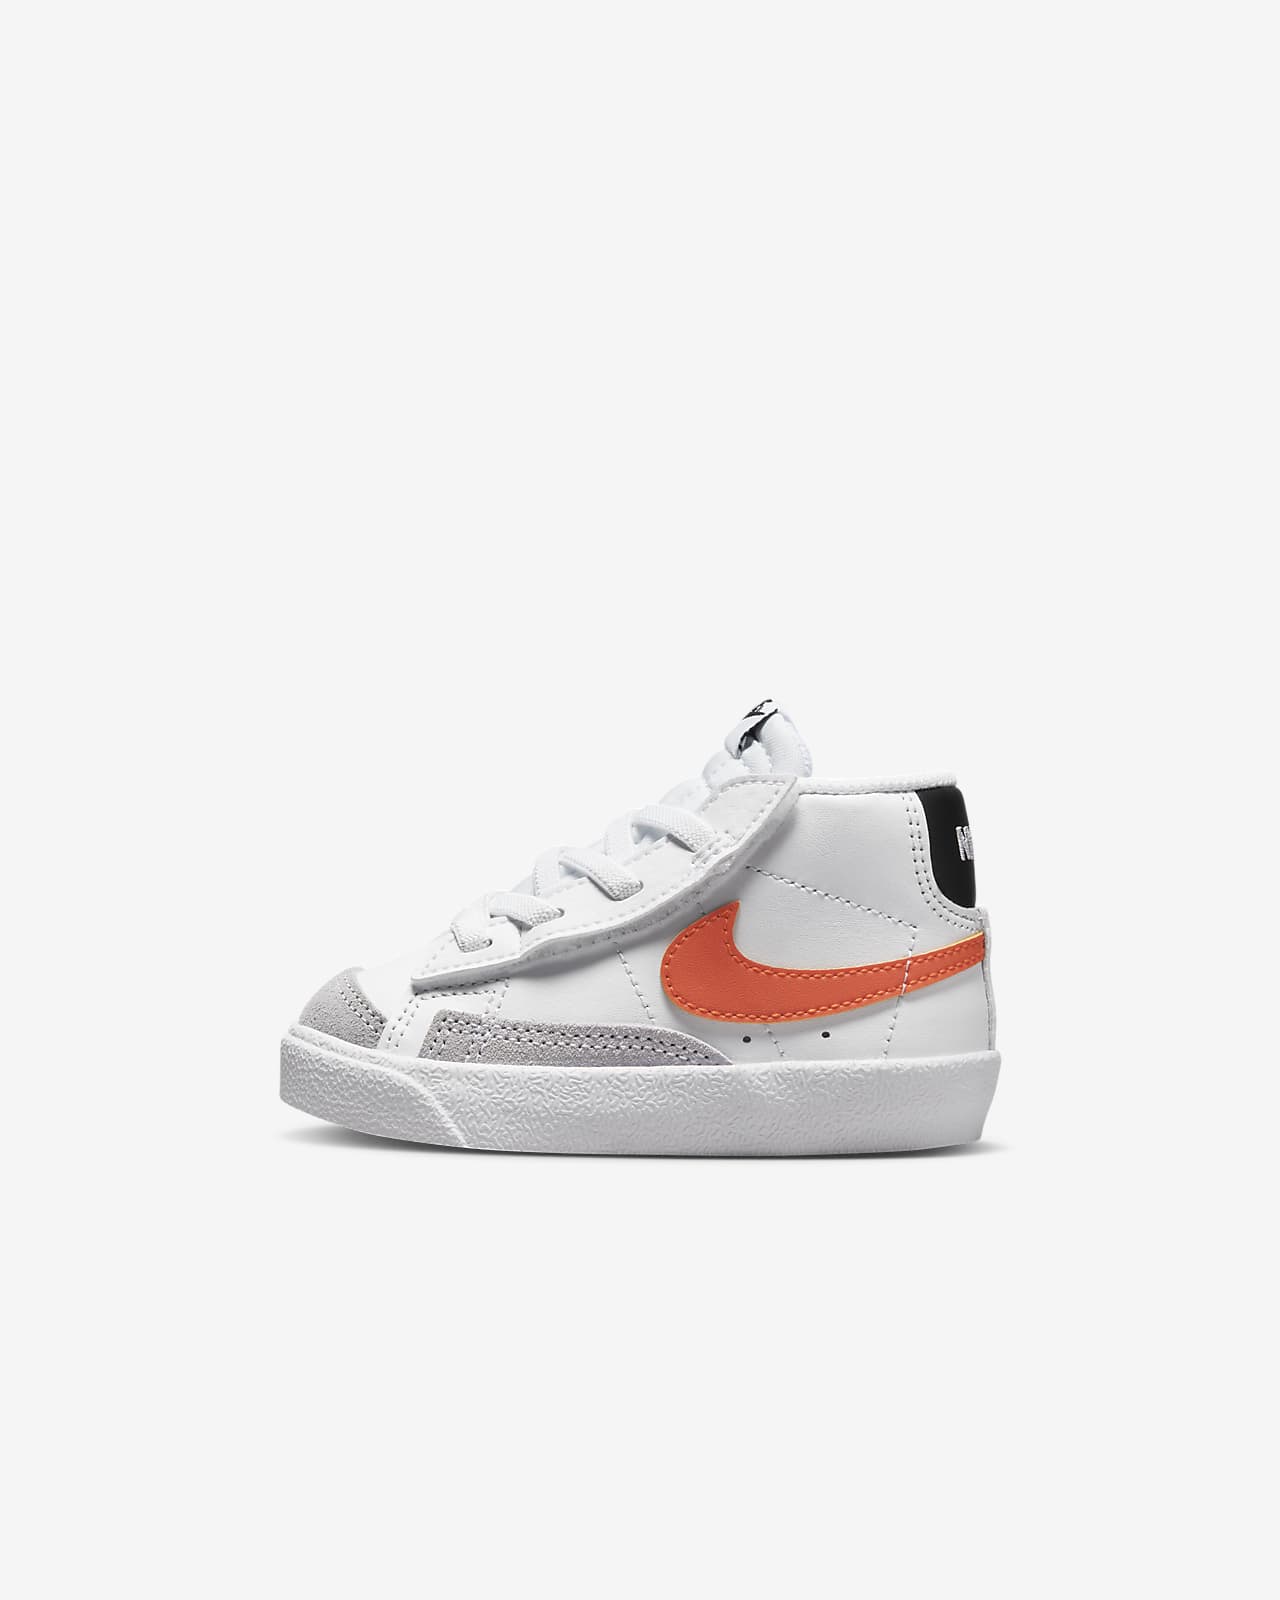 Nike Blazer Mid '77 Baby and Toddler Shoe